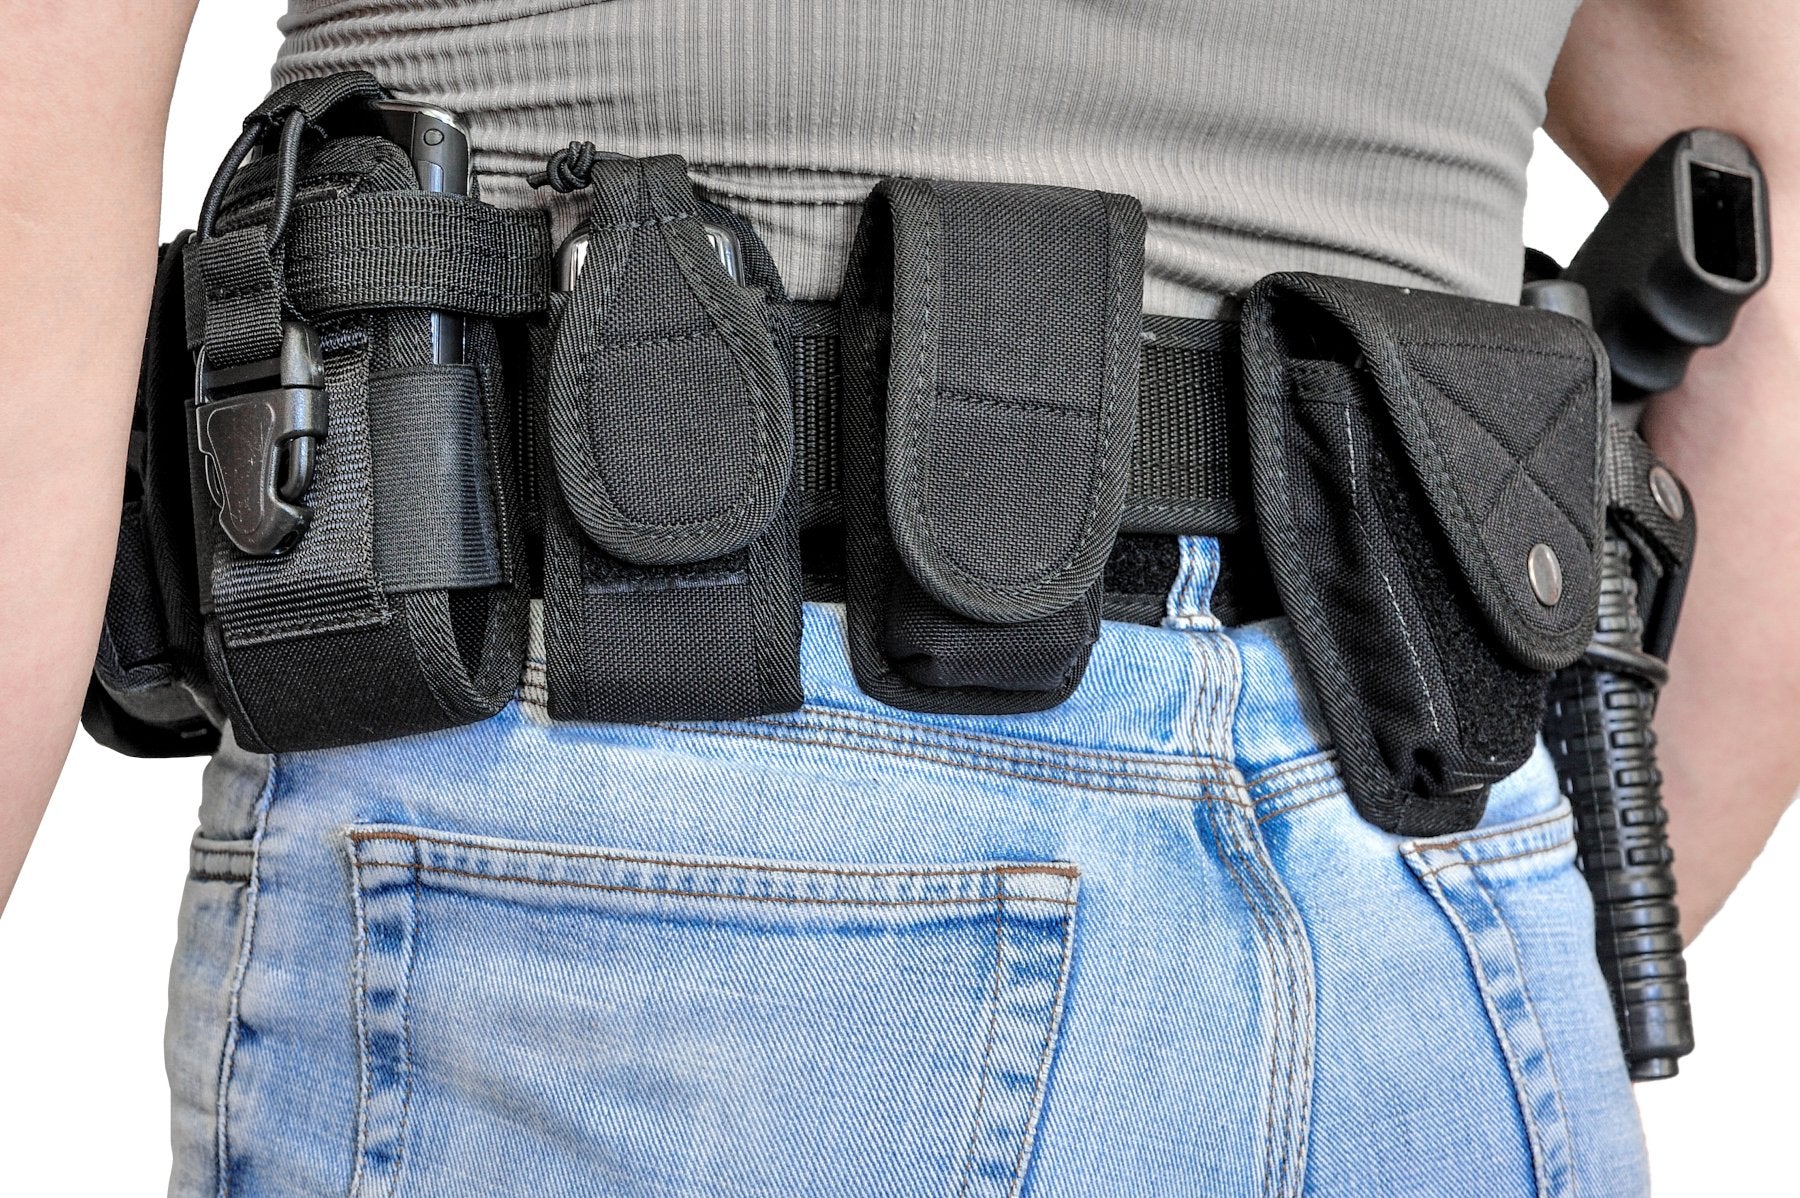 Person wearing a tactical belt with various accessories attached